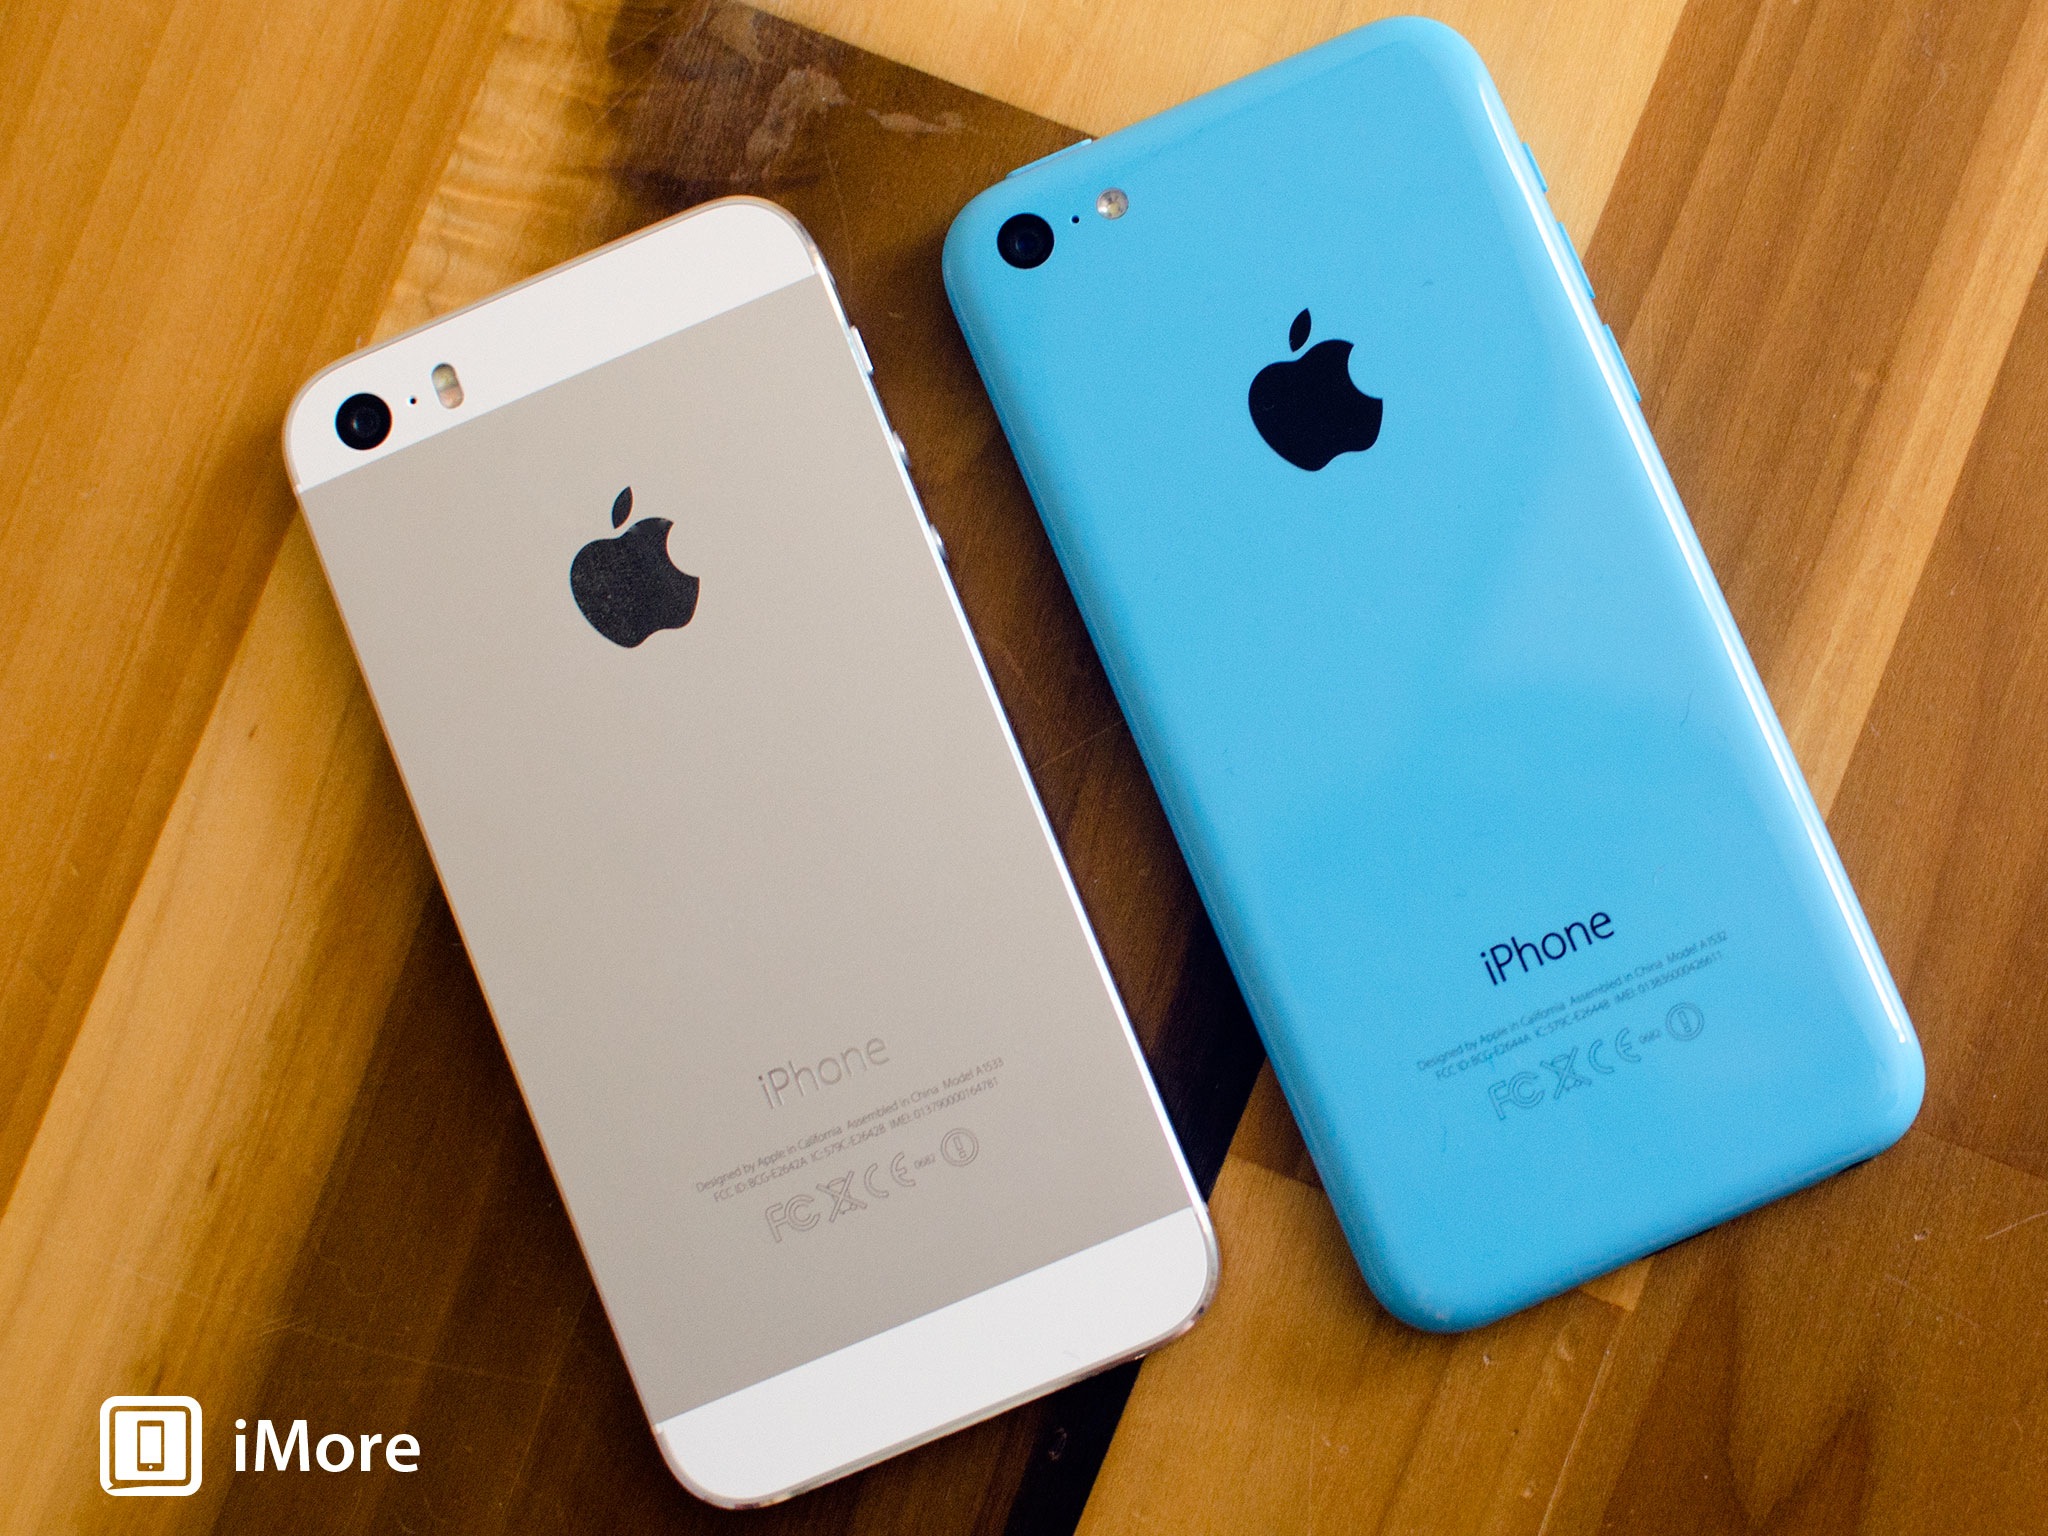 Goedkeuring in stand houden Expertise iPhone 5s vs. iPhone 5c vs. iPhone 4s: Which iPhone should you get? | iMore